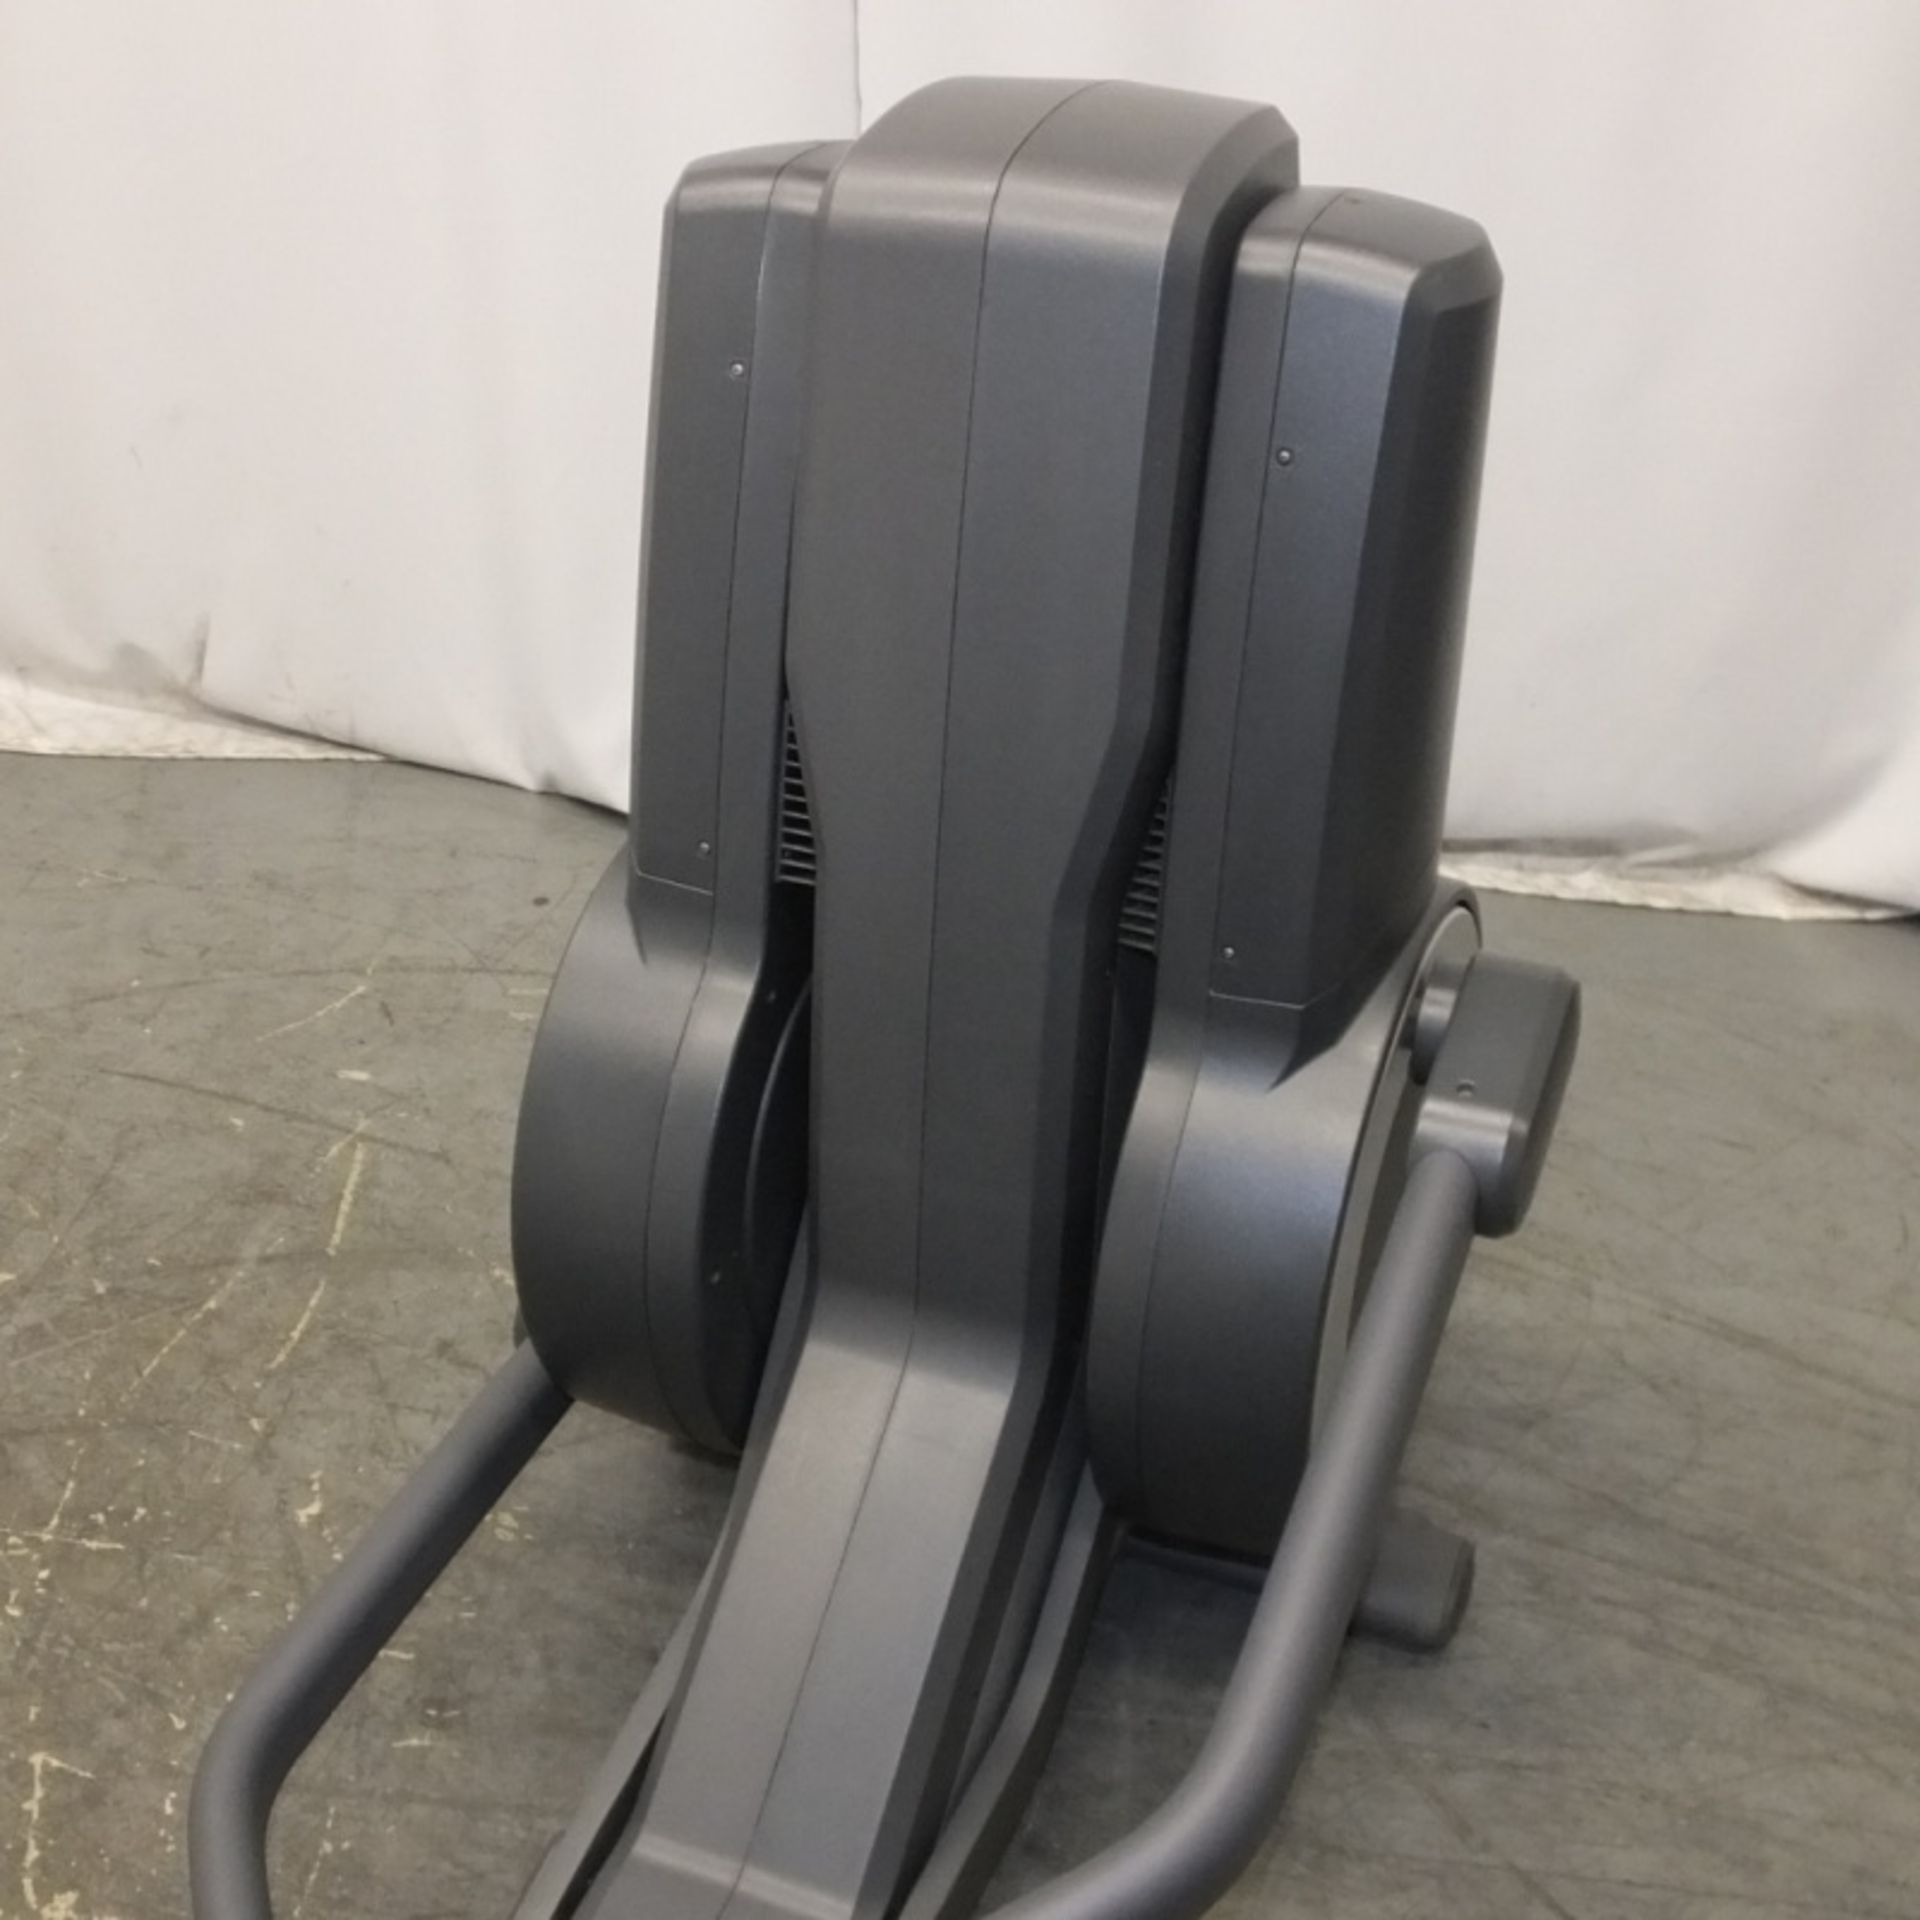 Life Fitness 95x Elliptical Cross Trainer - please check pictures for condition - Image 14 of 14